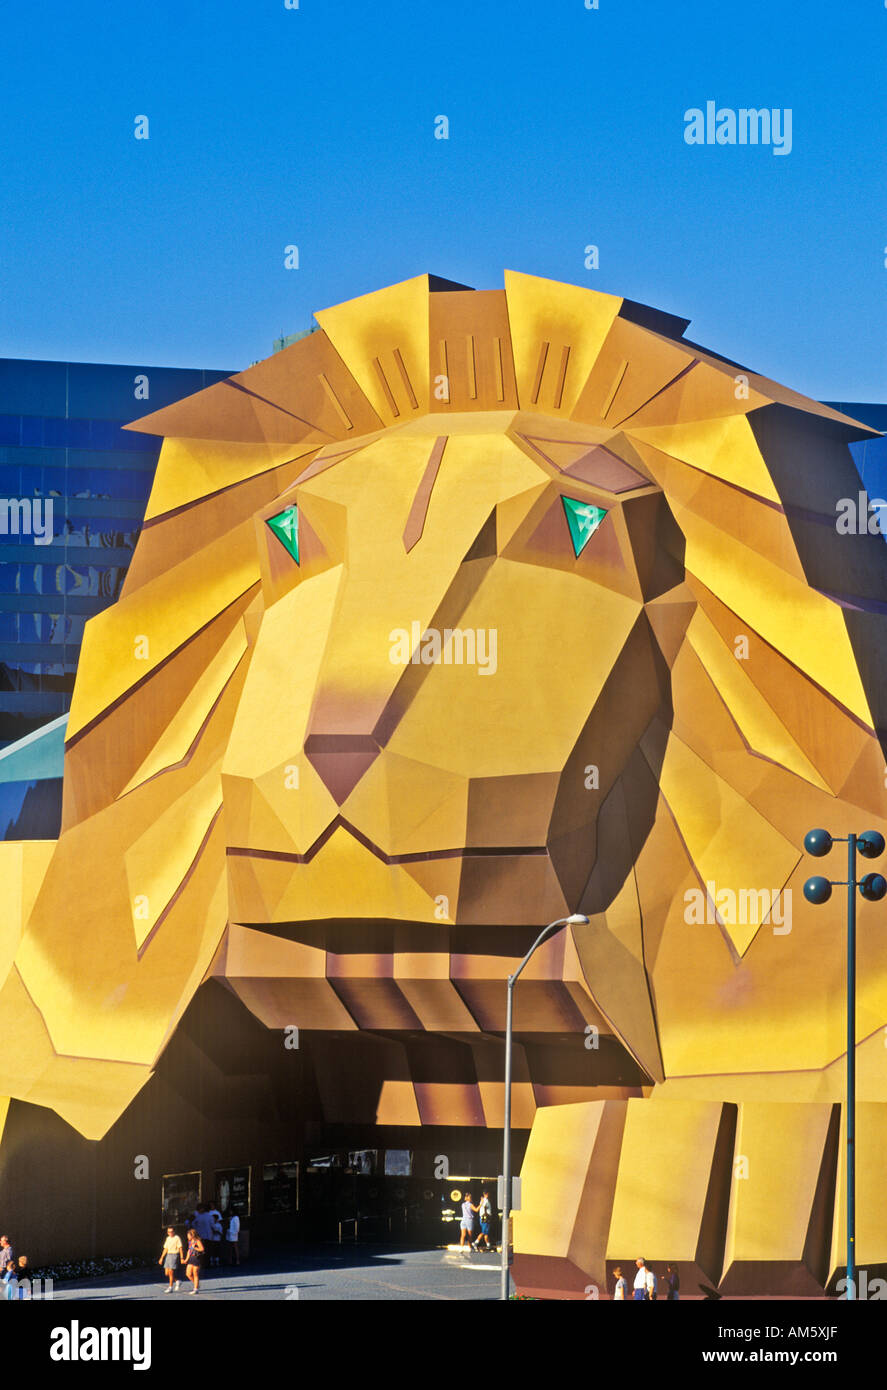 Replica of lion at the Entrance of the MGM Grand Hotel Las Vegas NV Stock Photo